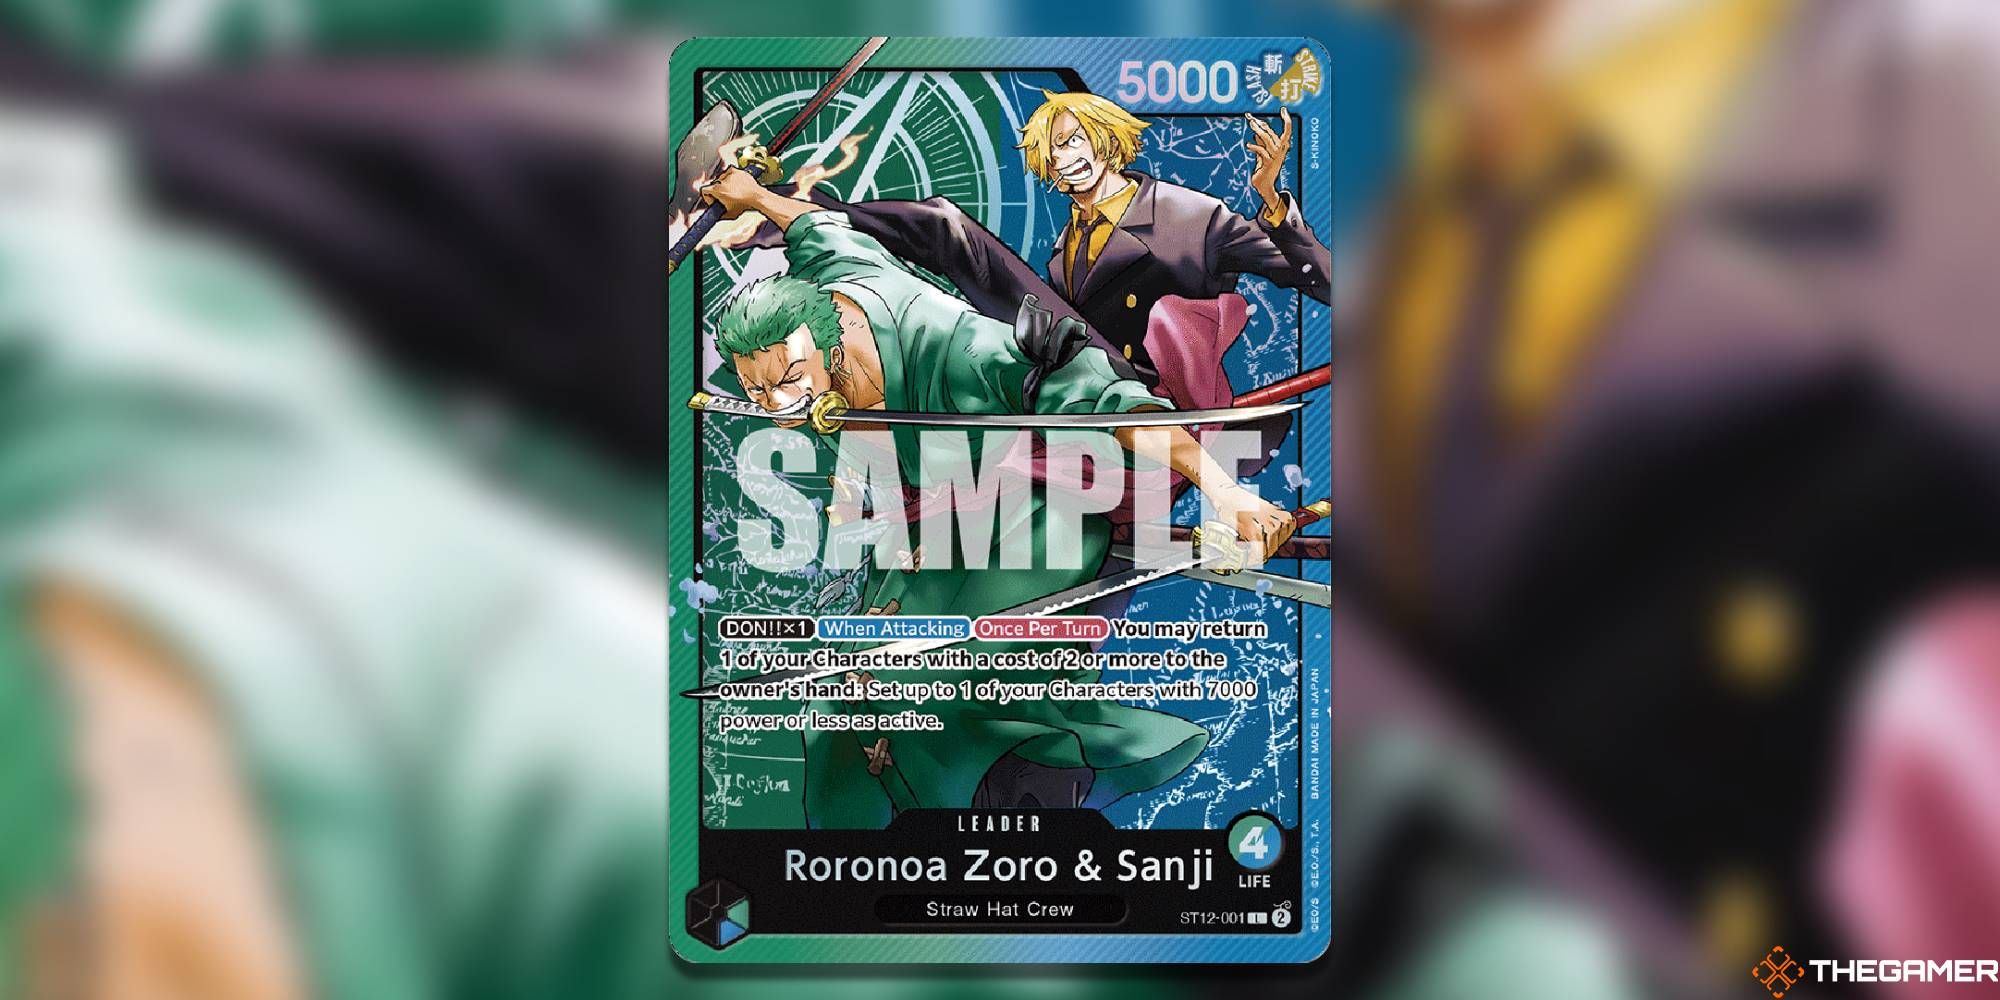 zoro and sanji leader st12 one piece card game